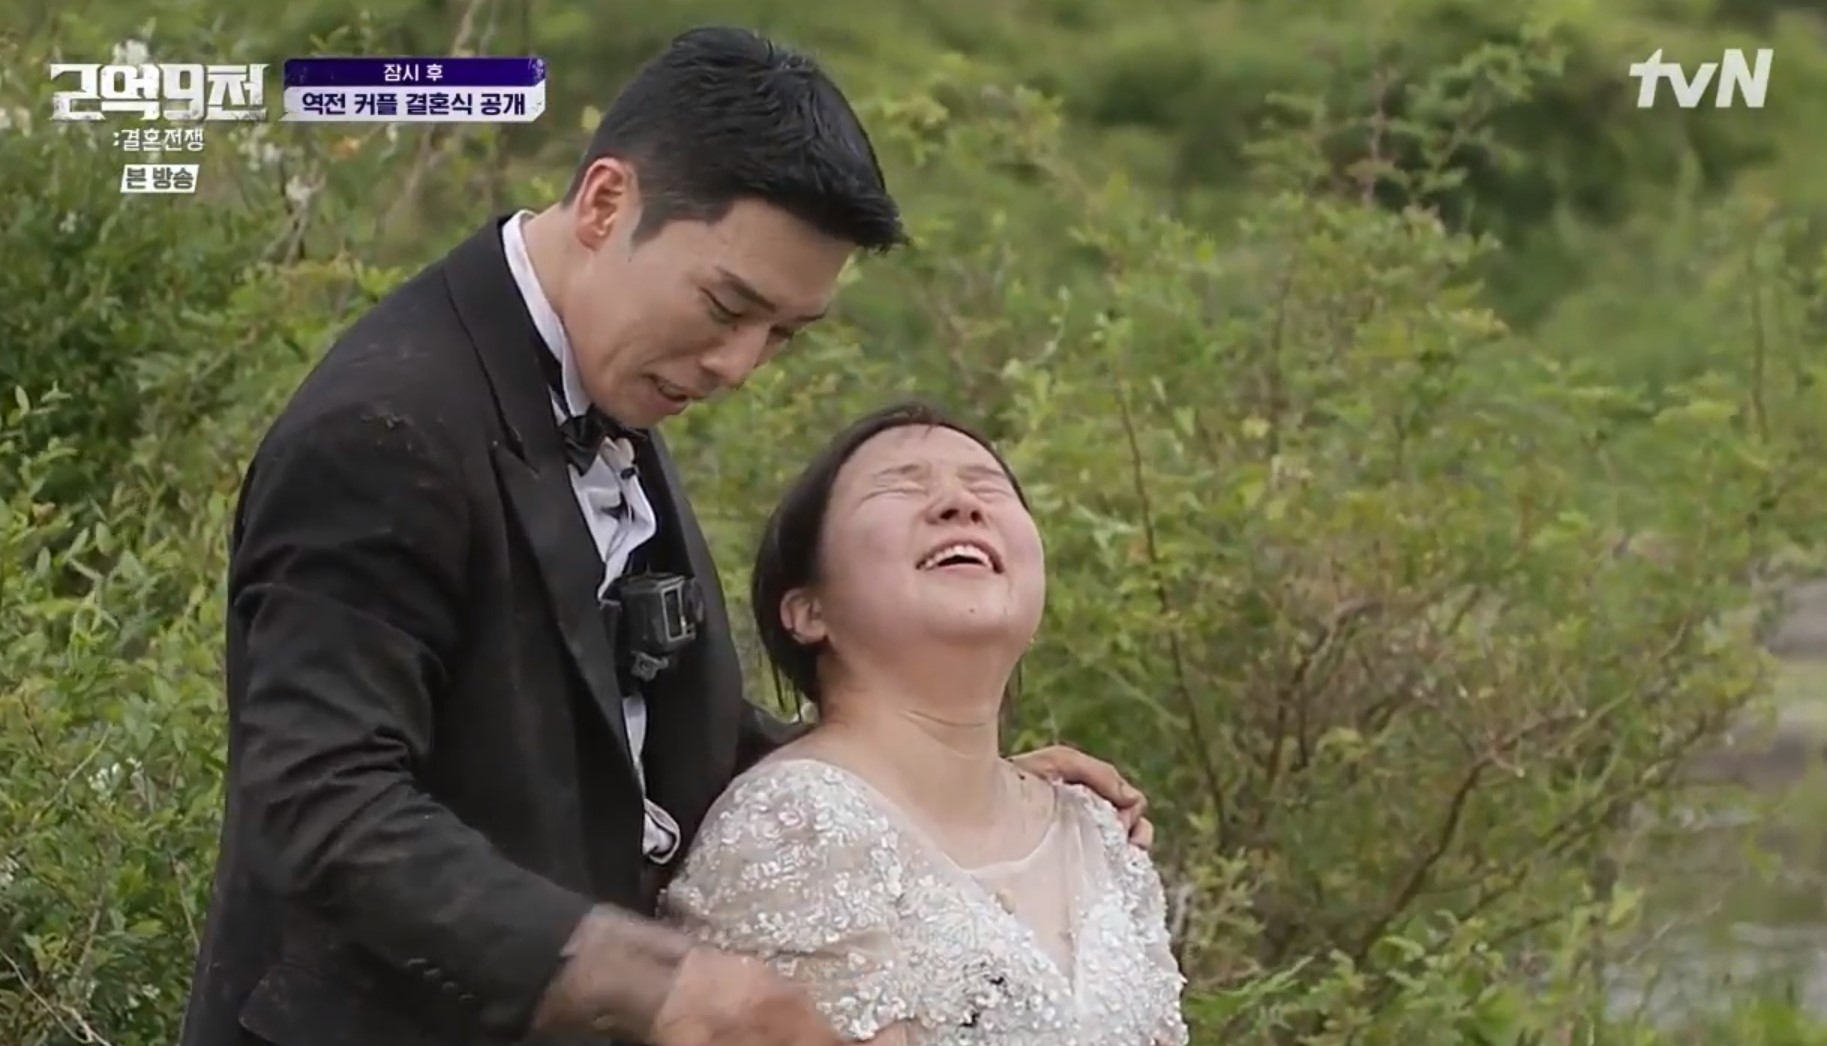 They are Choi Kwang-won and Shin Hye-sun&#44; who cry while hugging each other.